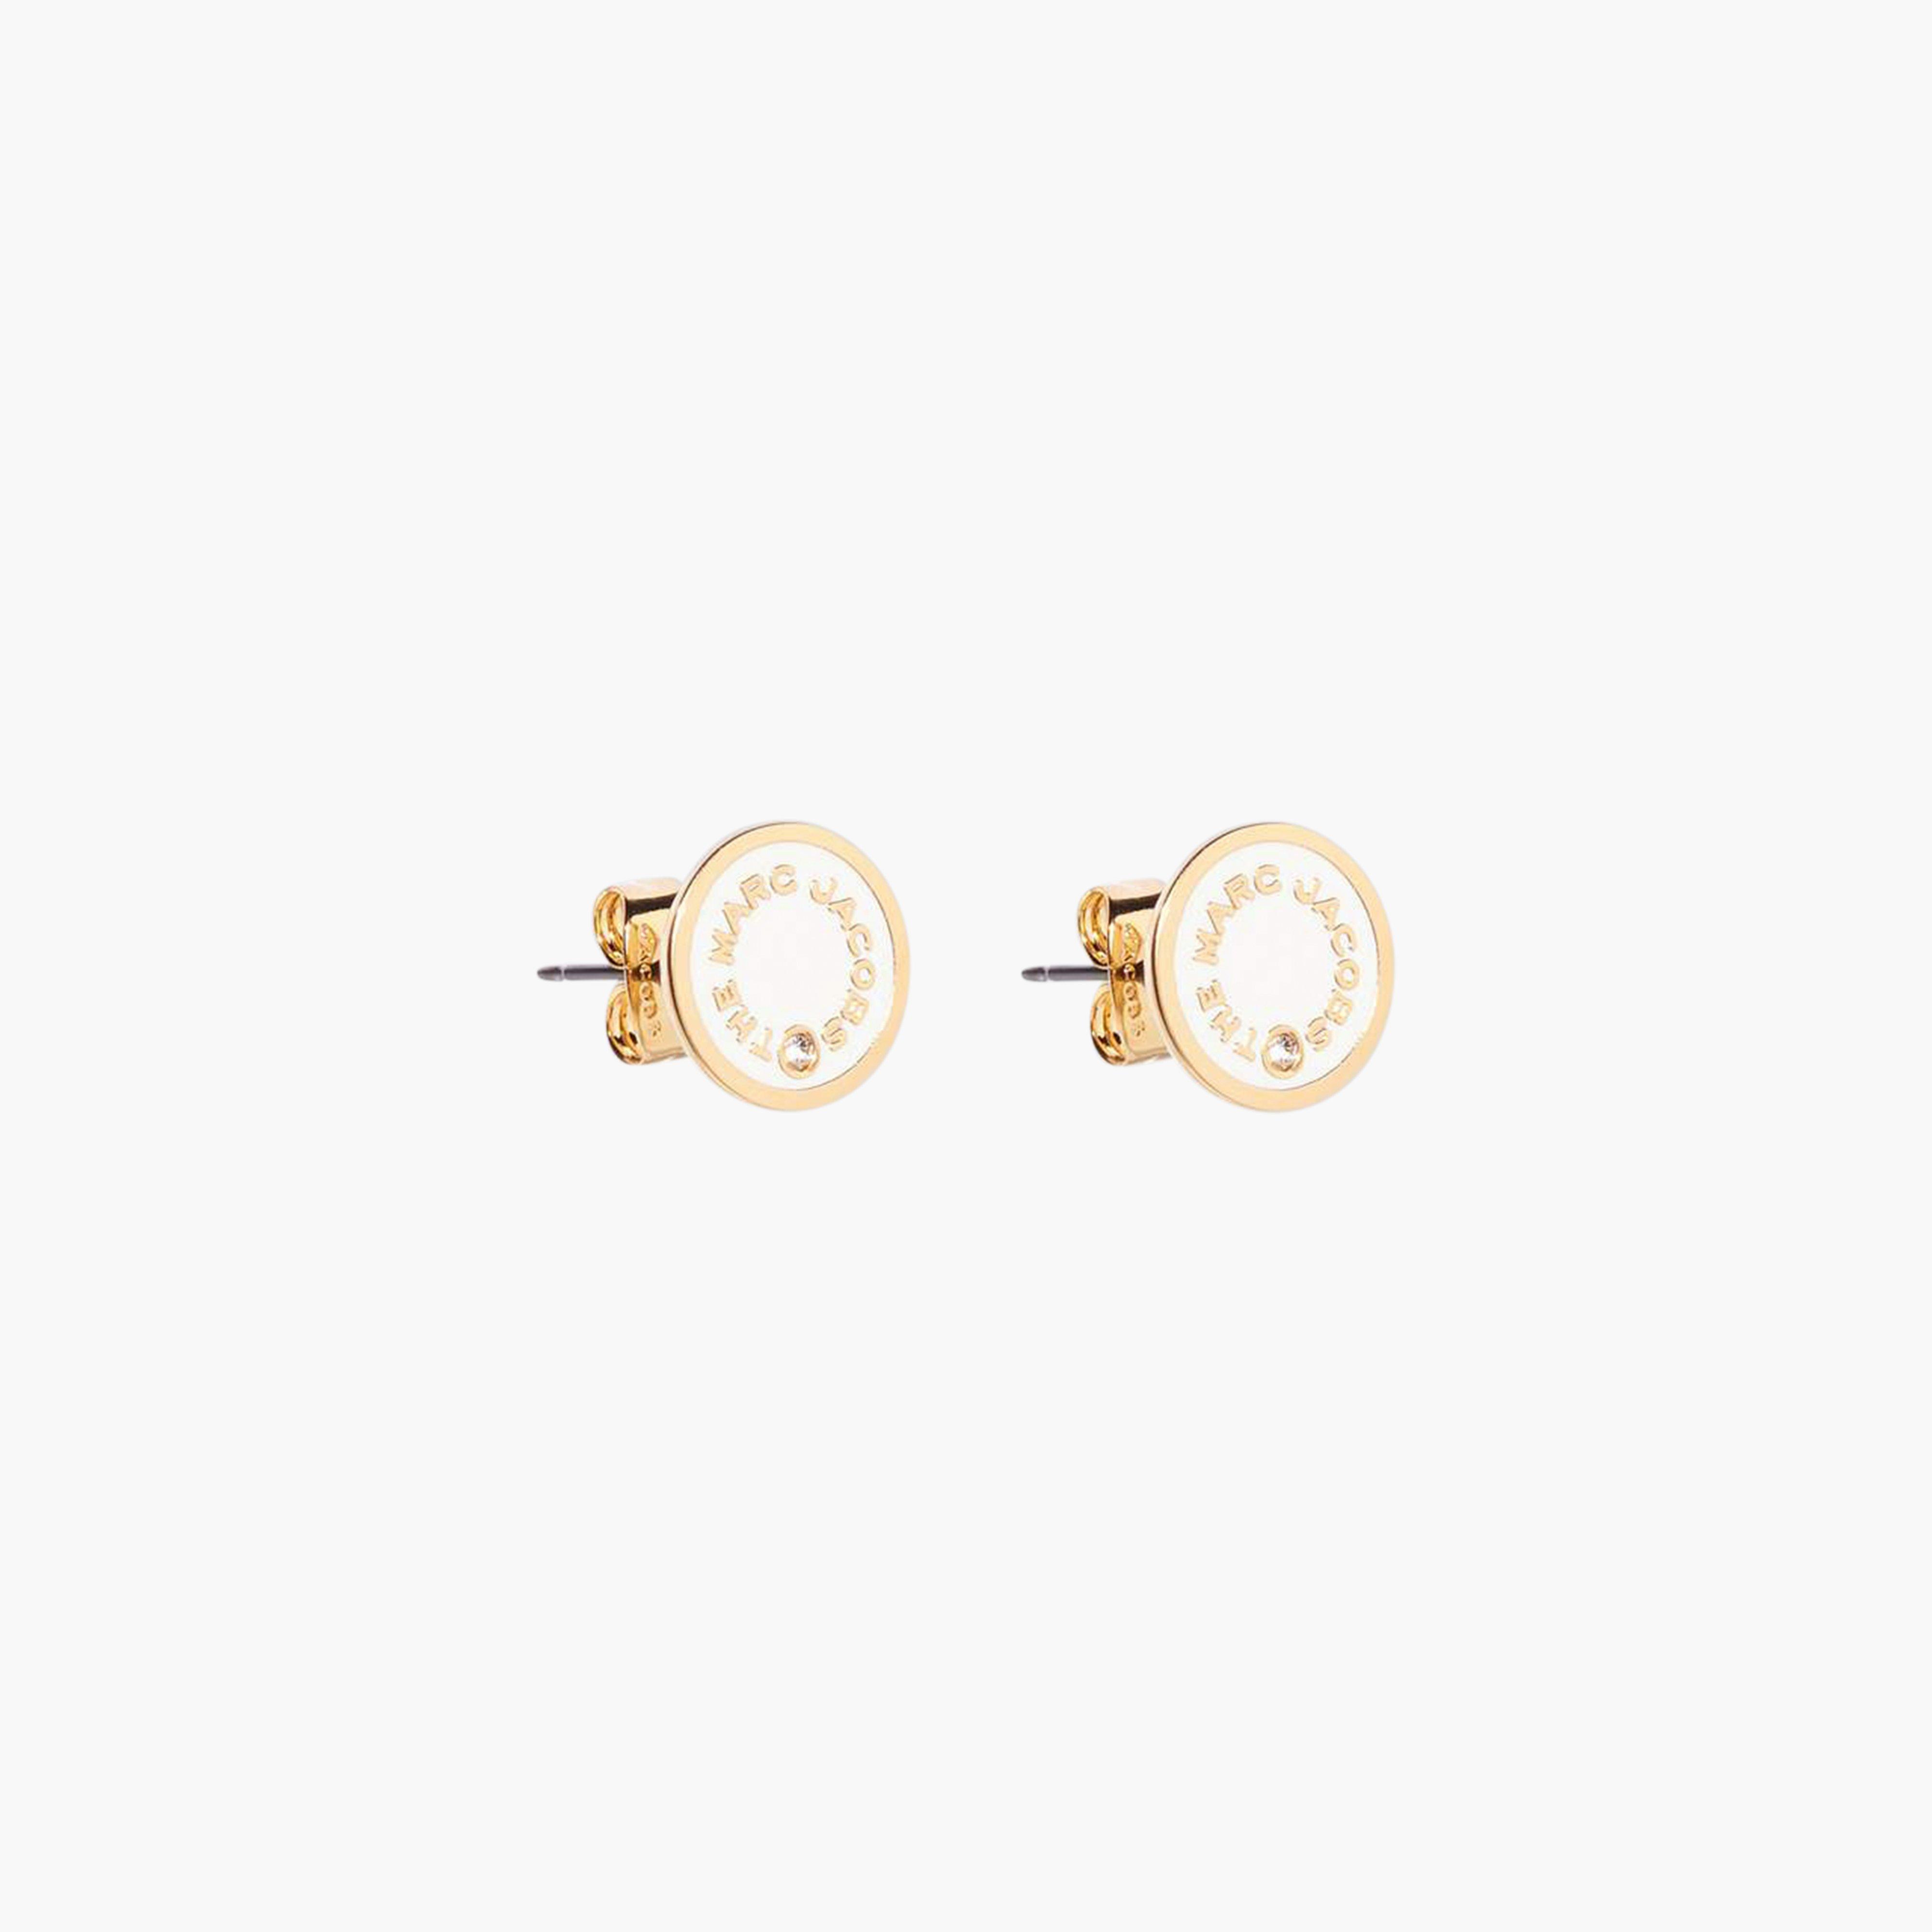 Marc by Marc jacobs The Medallion Studs,CREAM